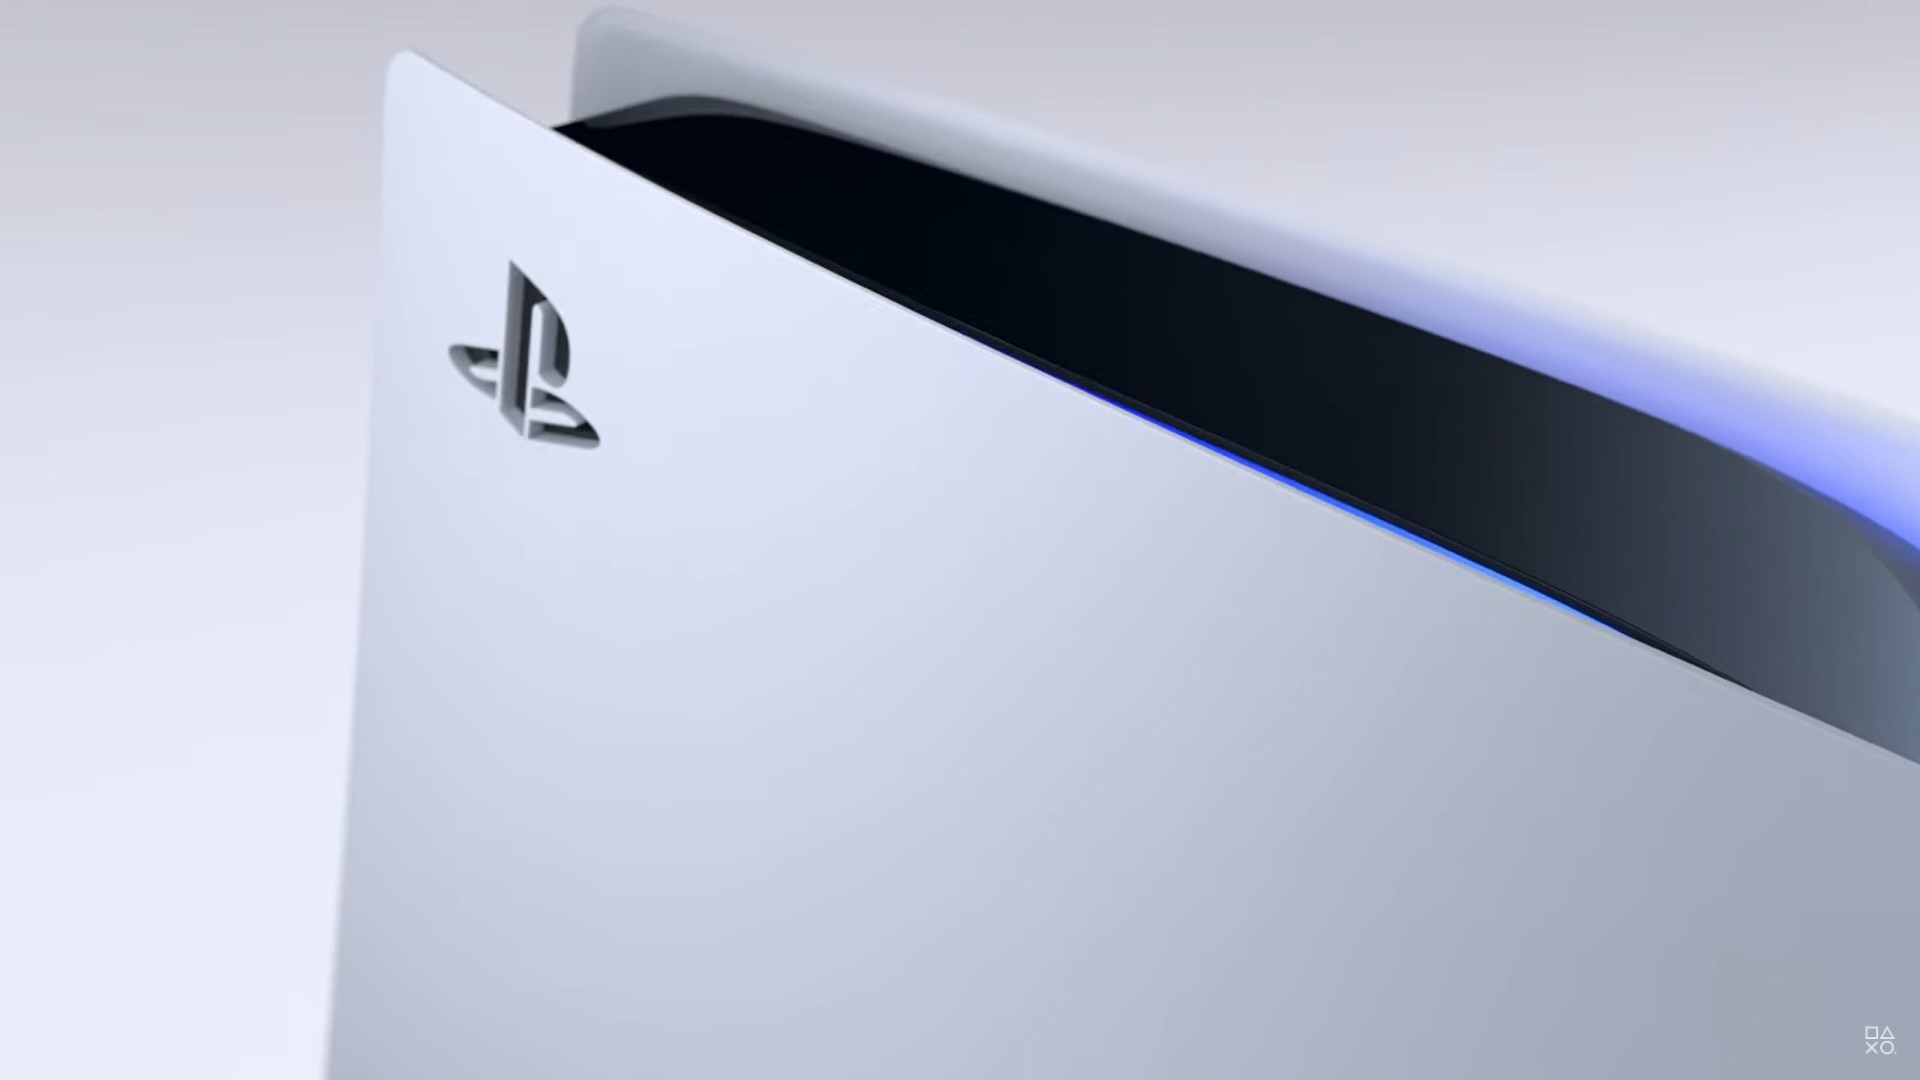 PS5 Pro will reportedly go big on ray tracing, with Sony asking devs to prepare their games for optimization